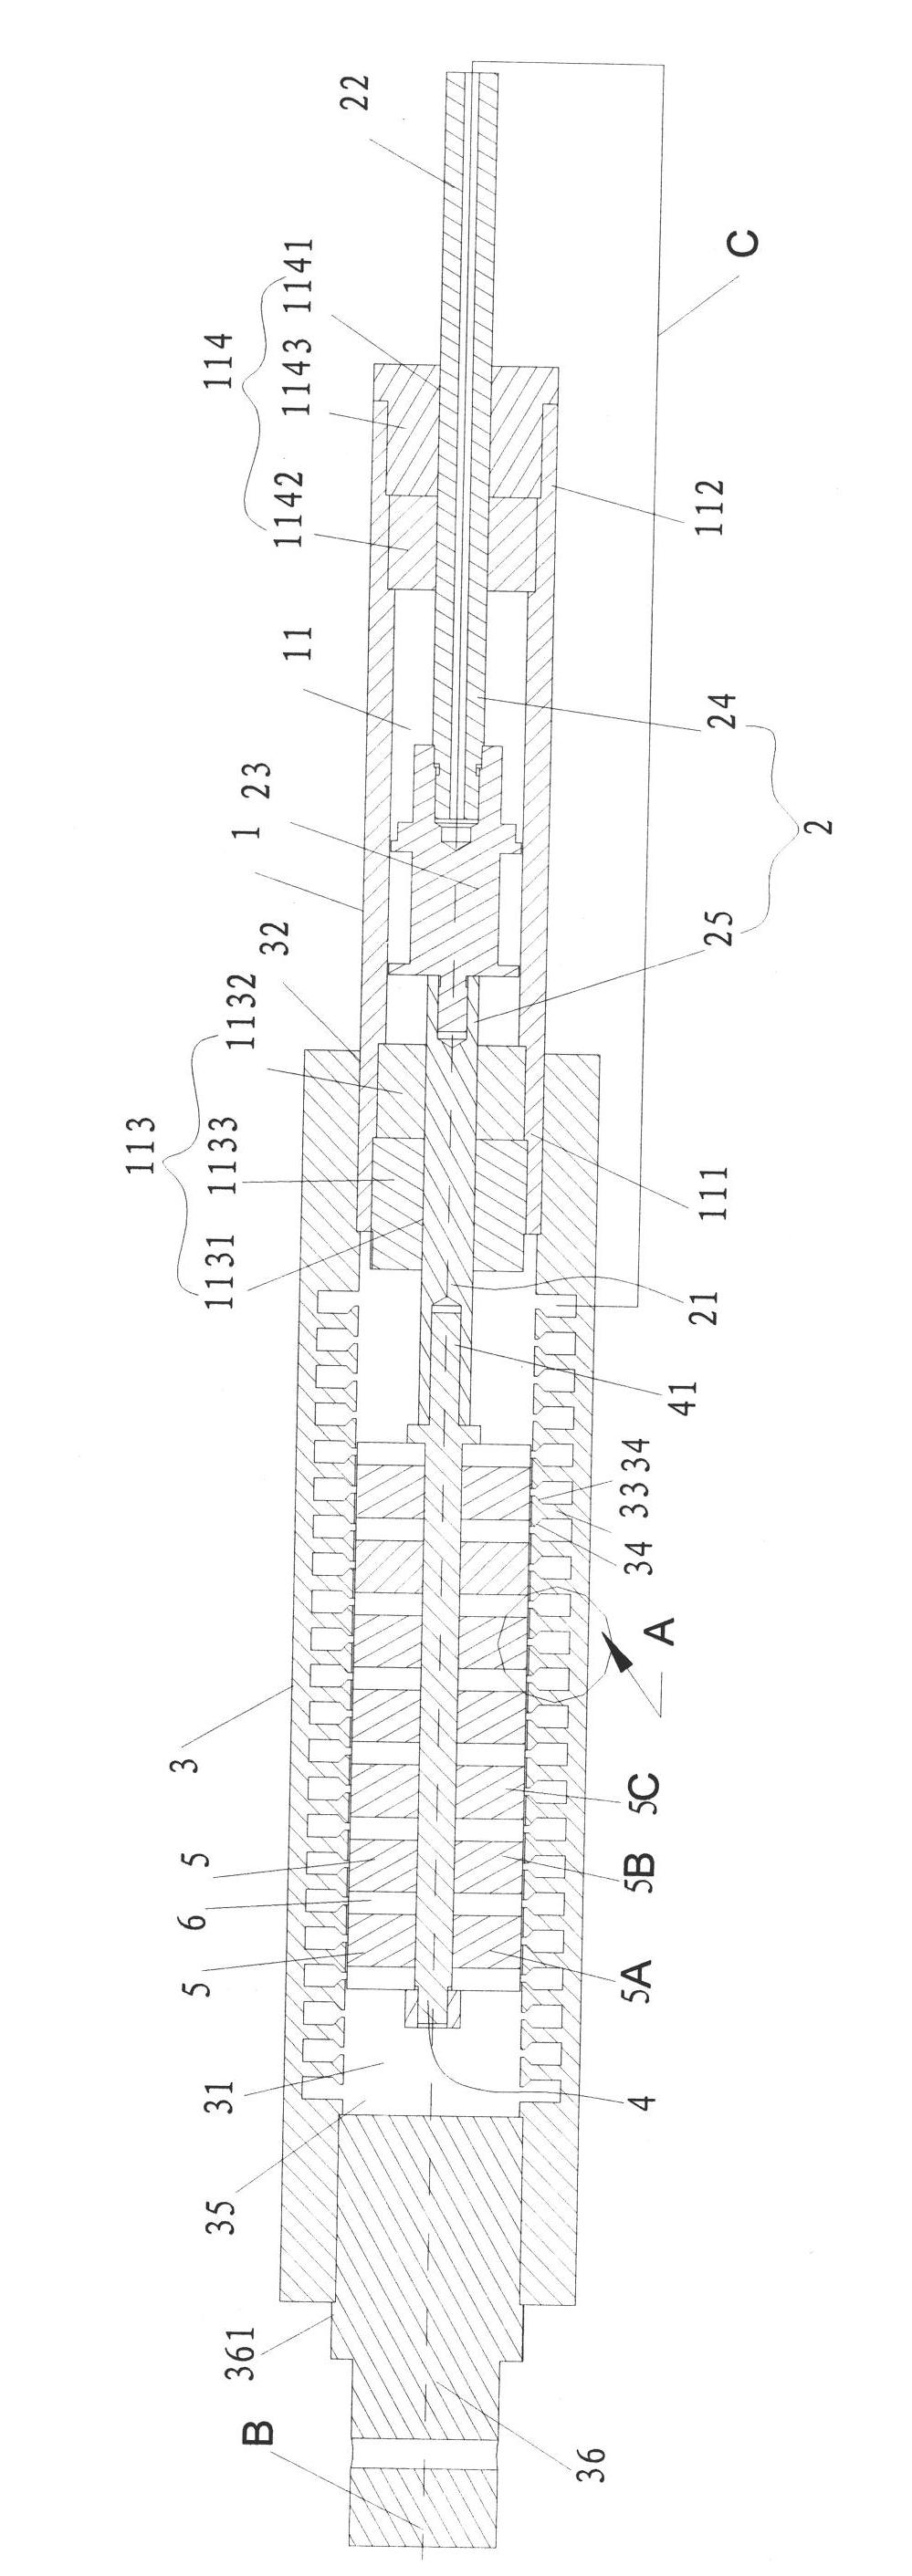 Self-powered electromagnetic rheological damper and its damping system